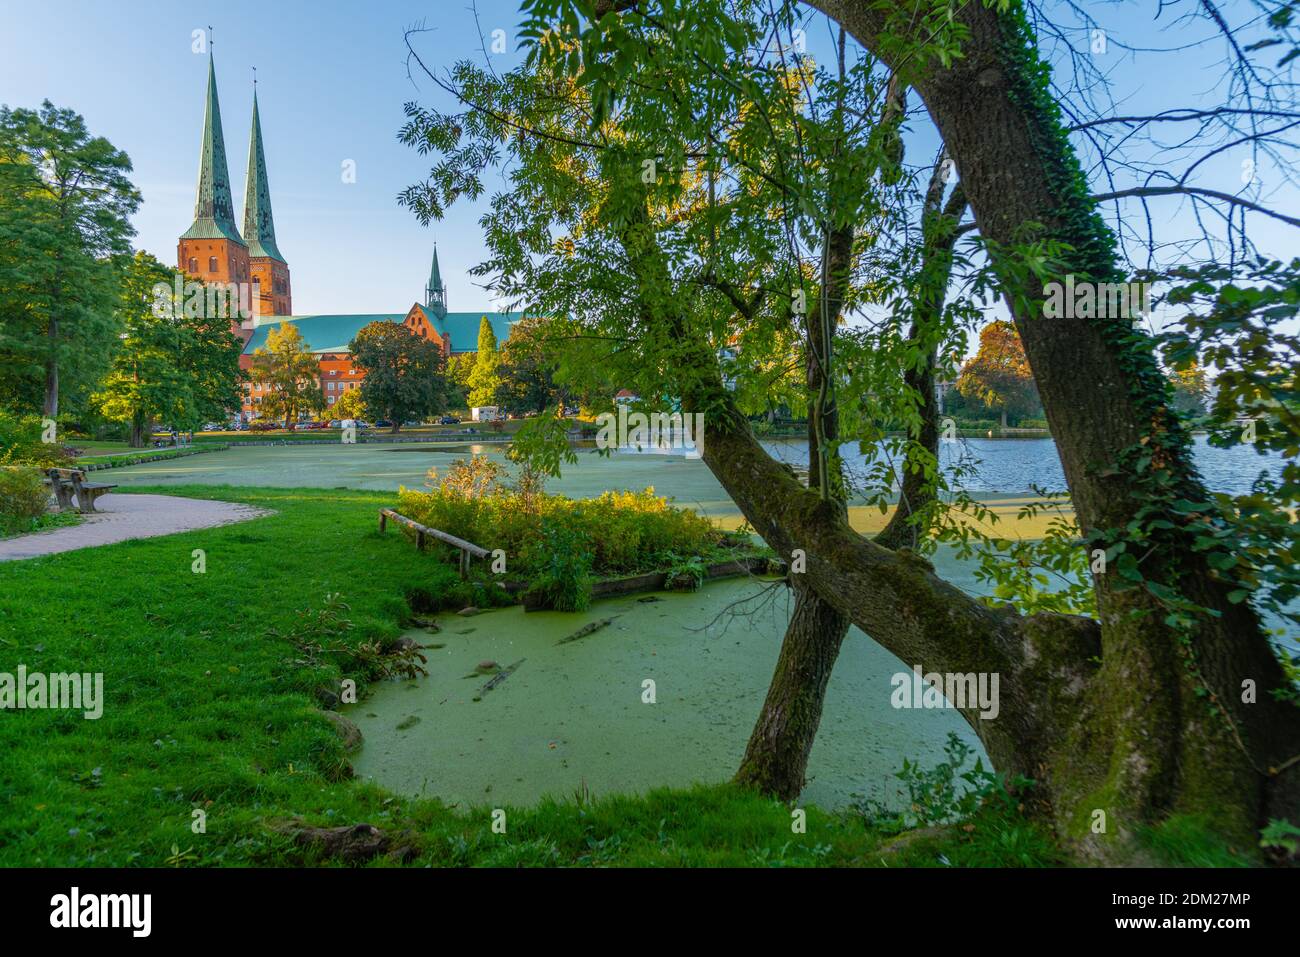 Lake Mühlenteich and Cathedral in the late evening,  Hanseatic City of Lübeck, Schleswig-Holstein, North Germany, Europe Stock Photo